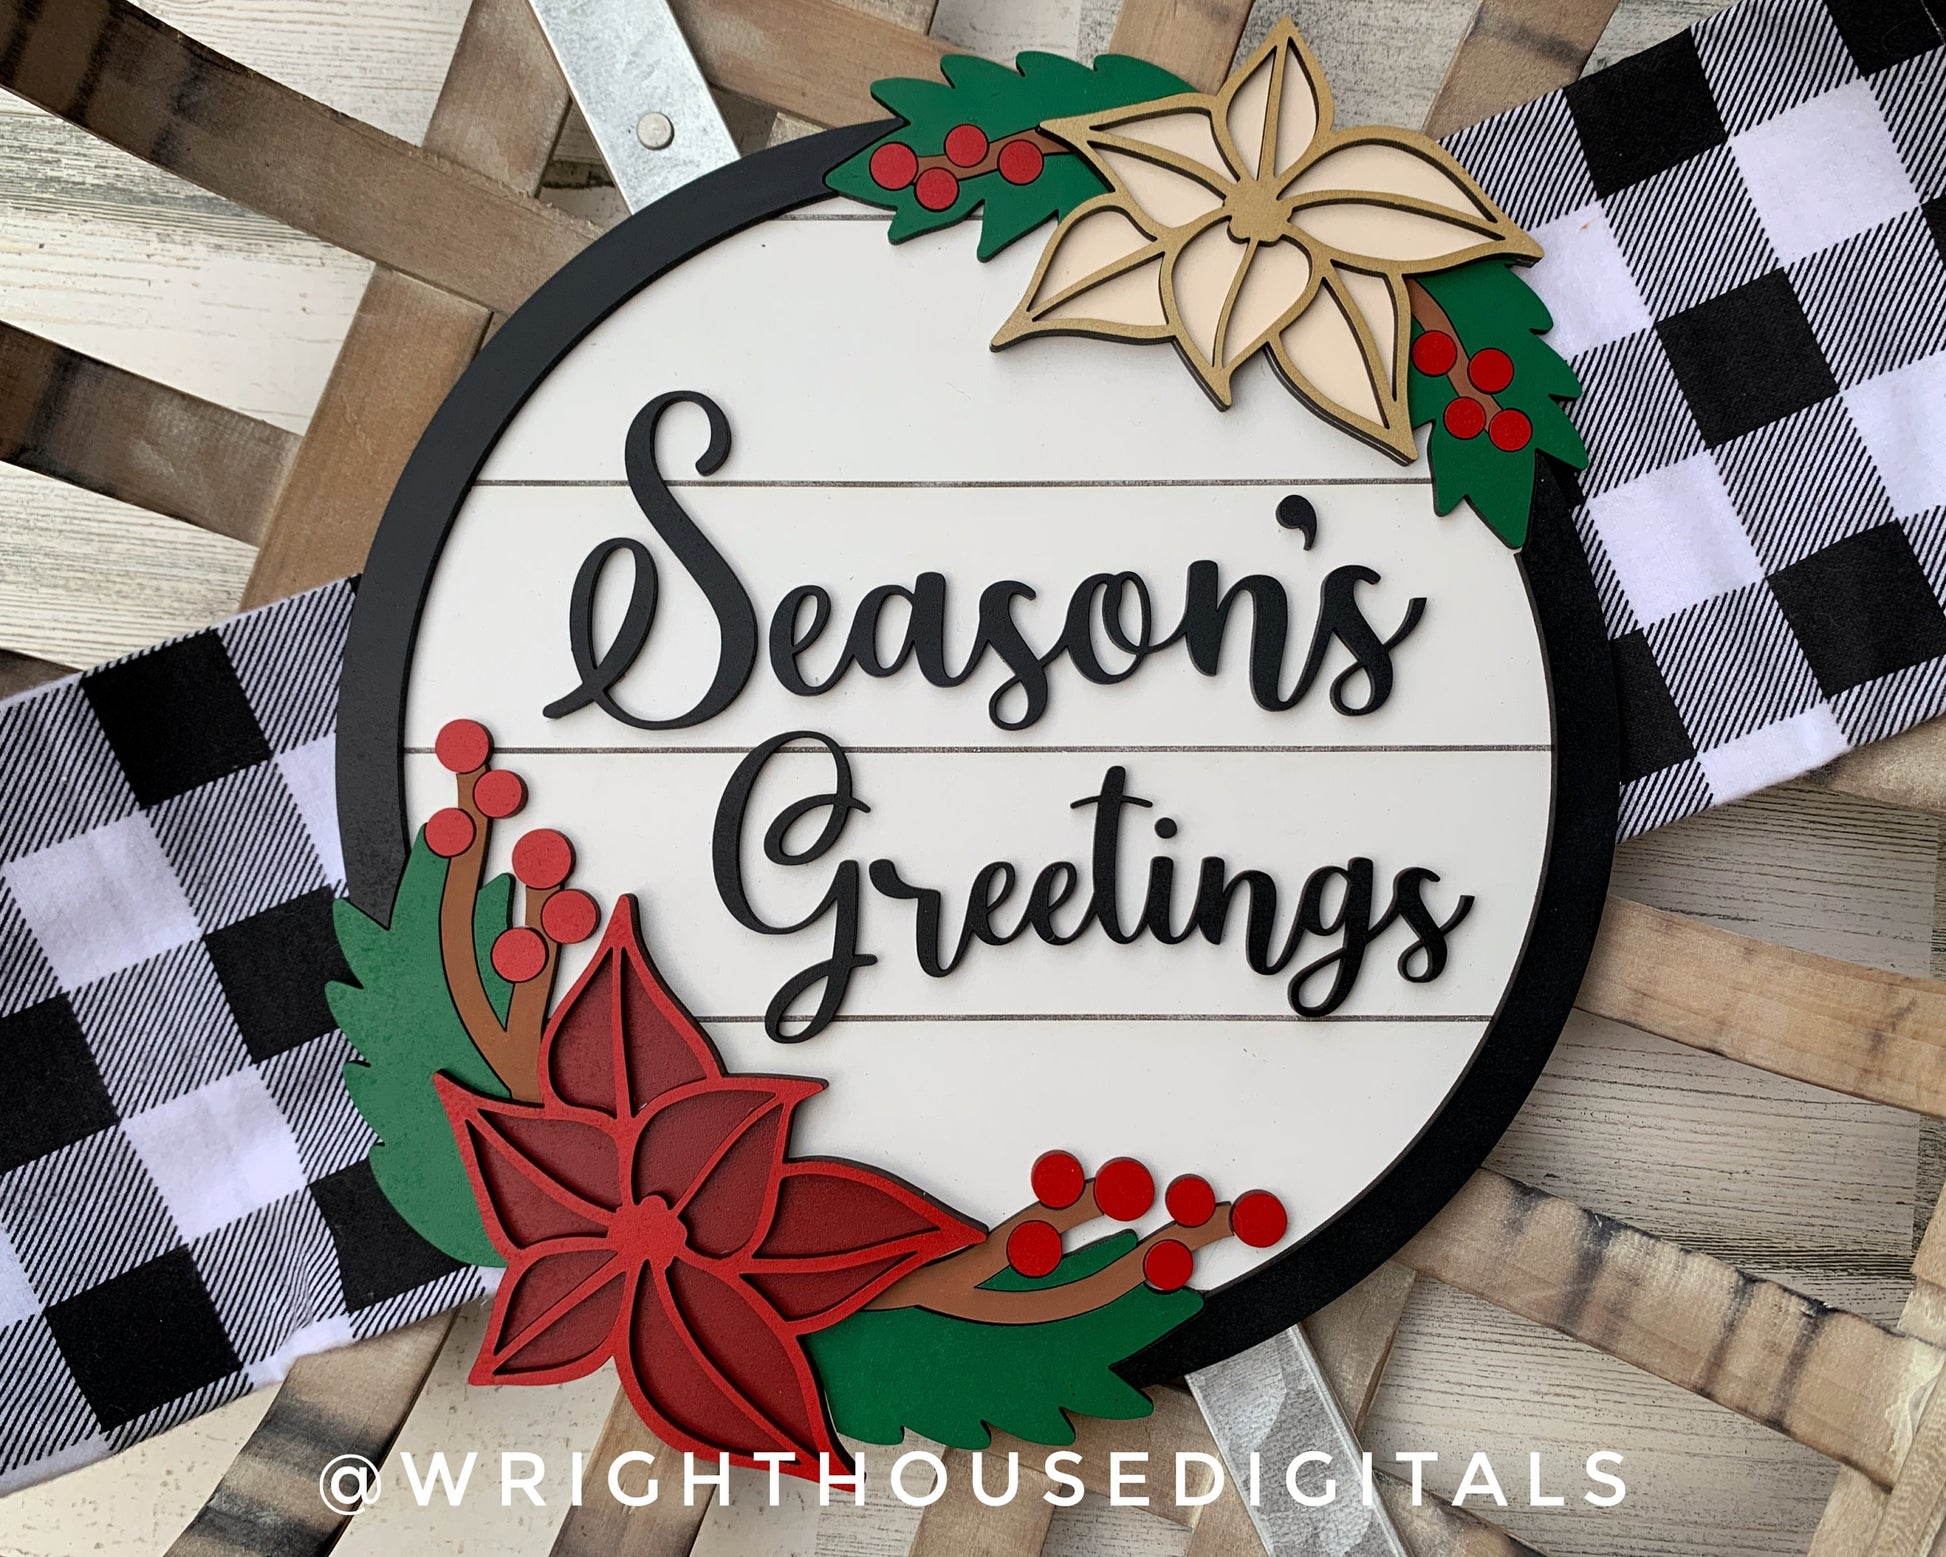 Holiday Poinsettia Floral Sign Bundle - Christmas Sign Making and DIY Kits - Single Line Cut File For Glowforge Lasers - Digital SVG File